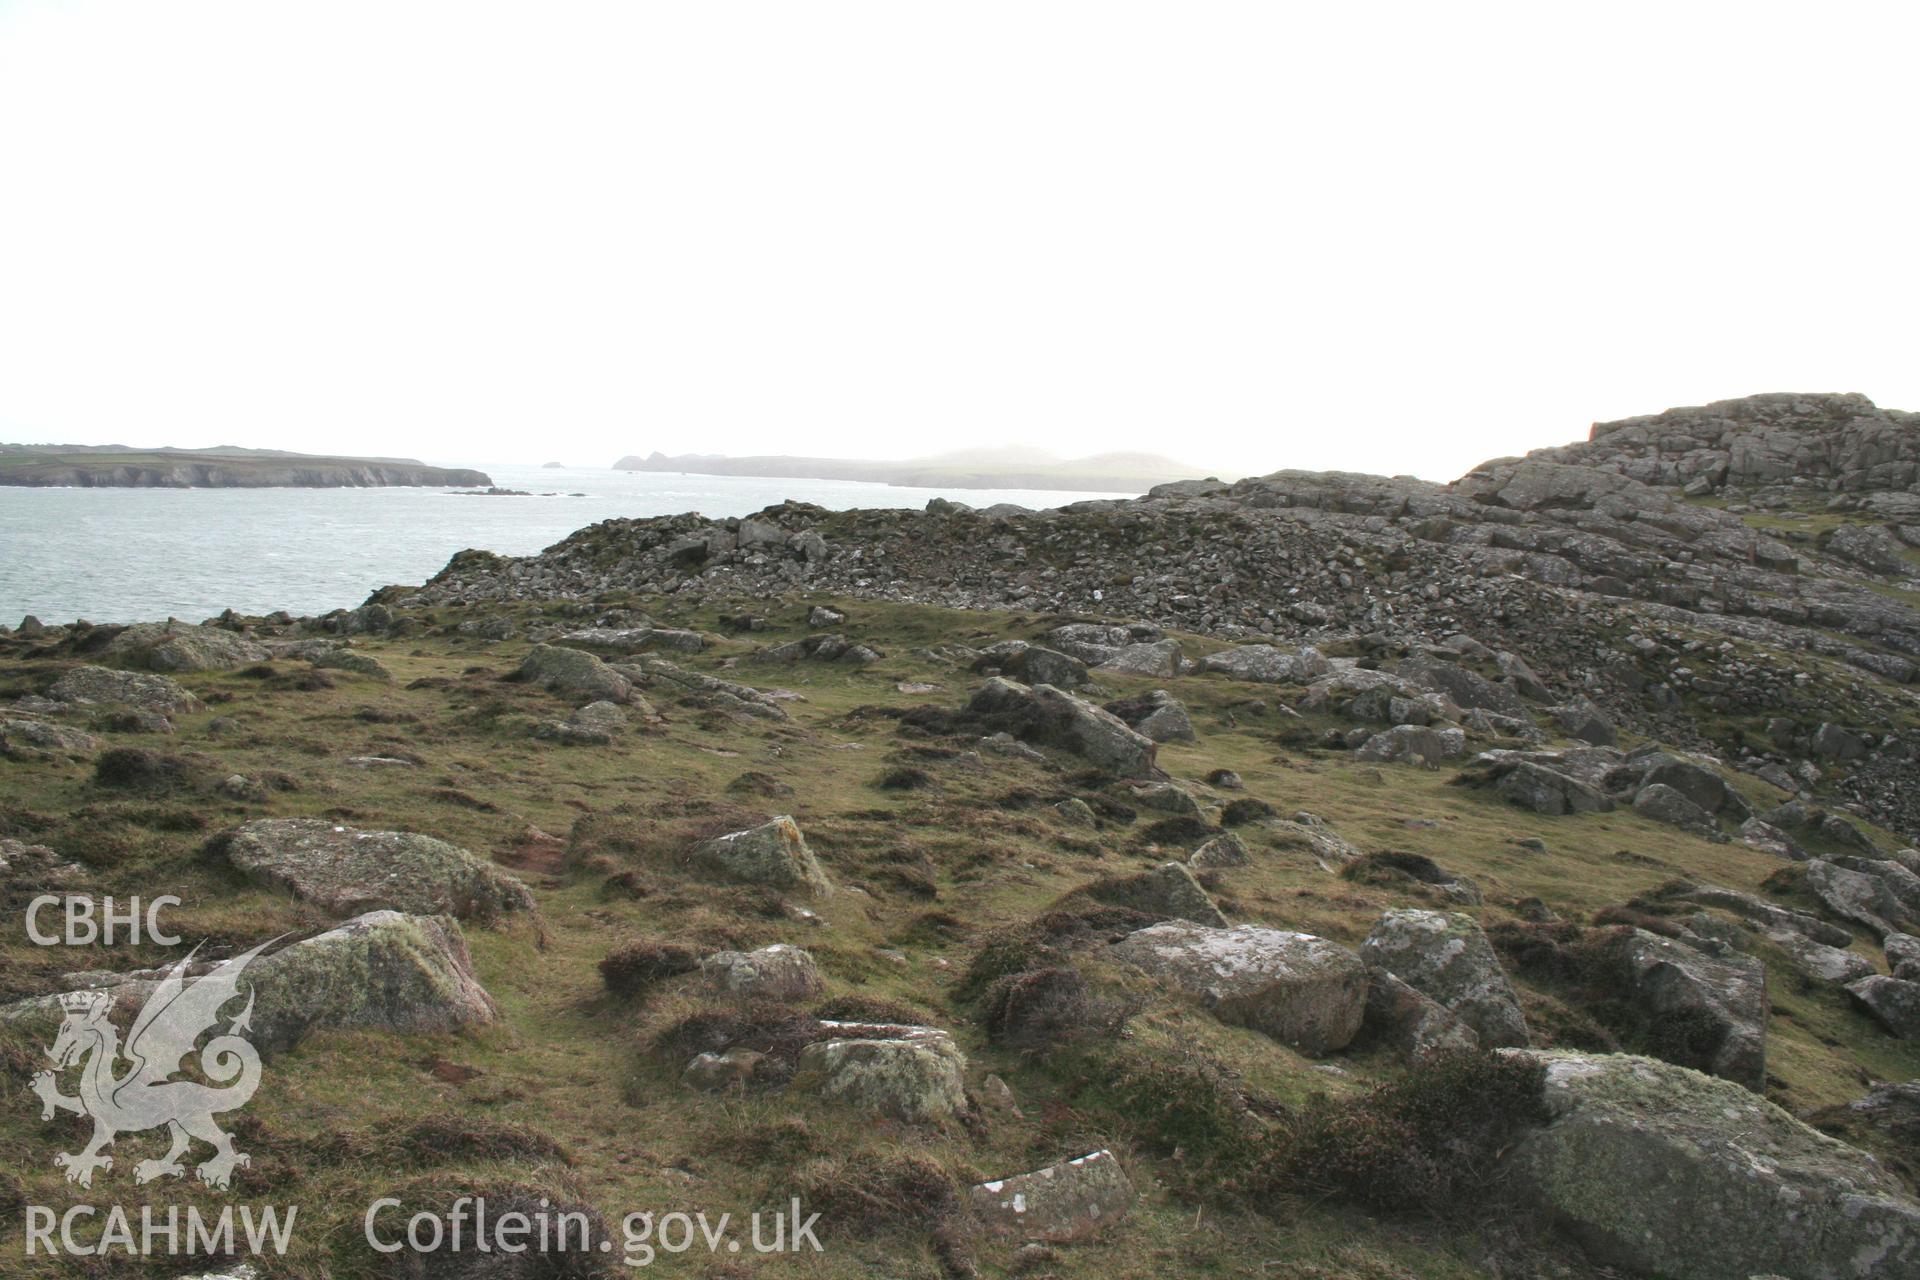 Clawdd y Milwyr promontory fort. General view of main ramparts cutting across promontory from east.